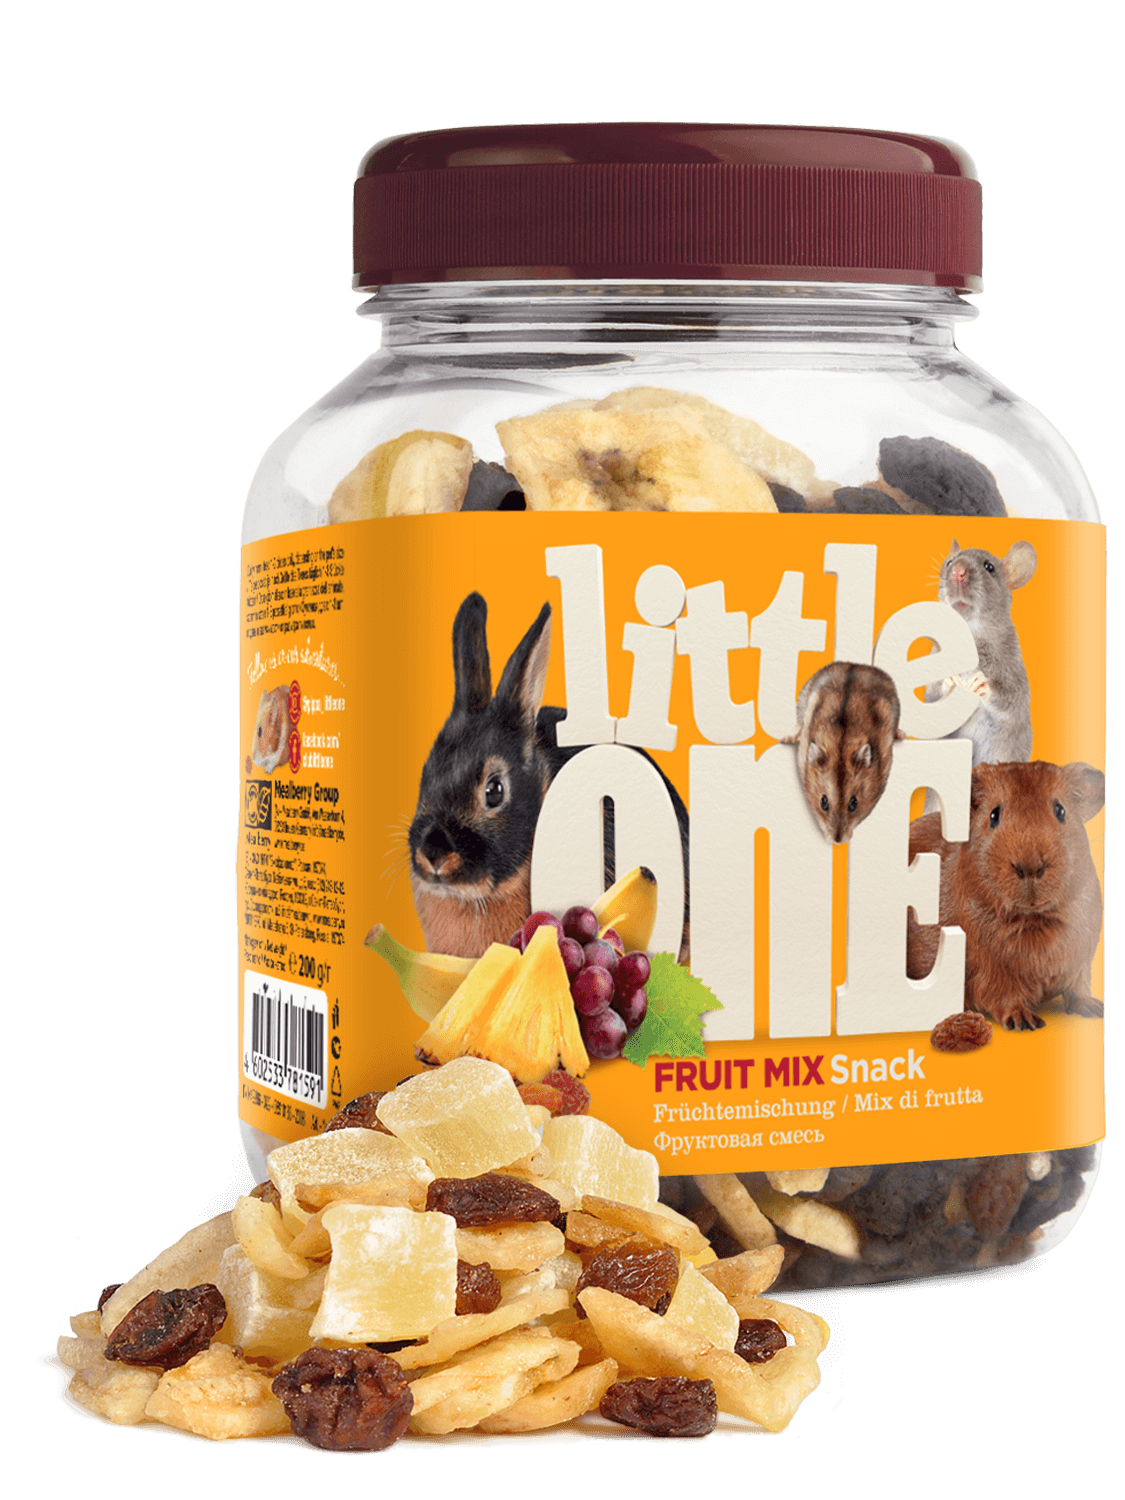 Little One Fruit Mix Snack 